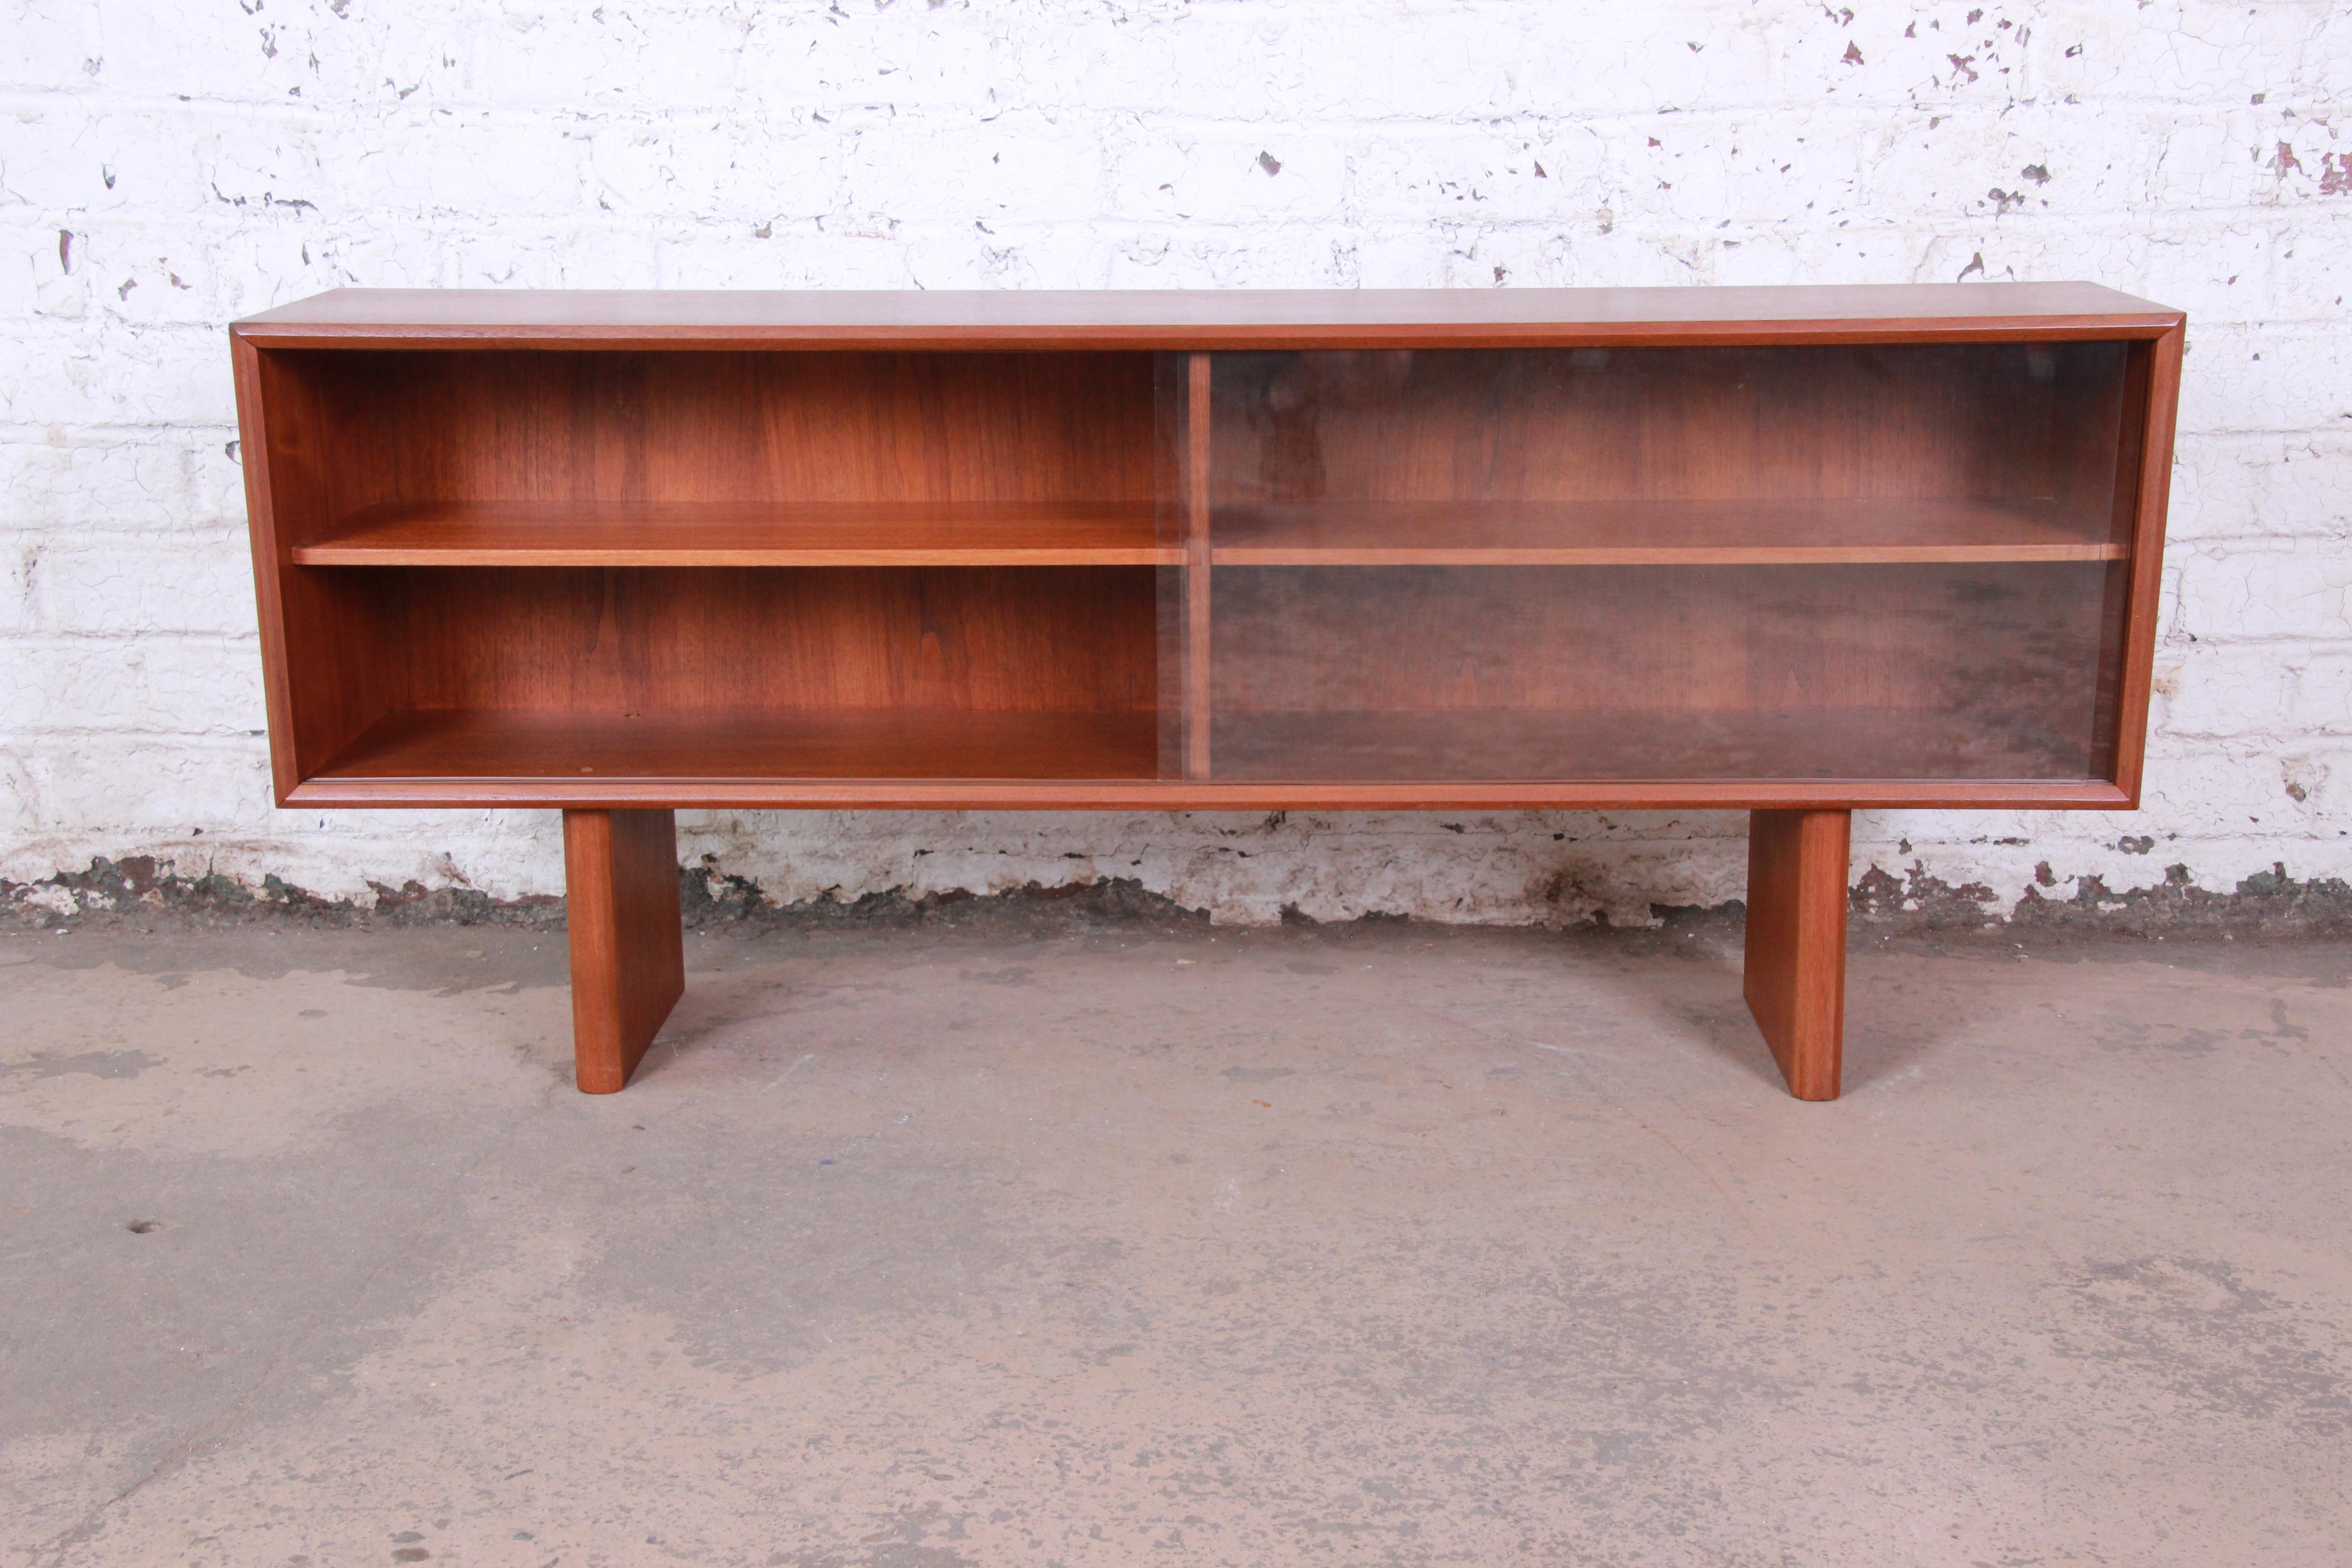 Mid-20th Century Svend Aage Larsen for Faarup Danish Modern Teak Glass Front Bookcase or Credenza